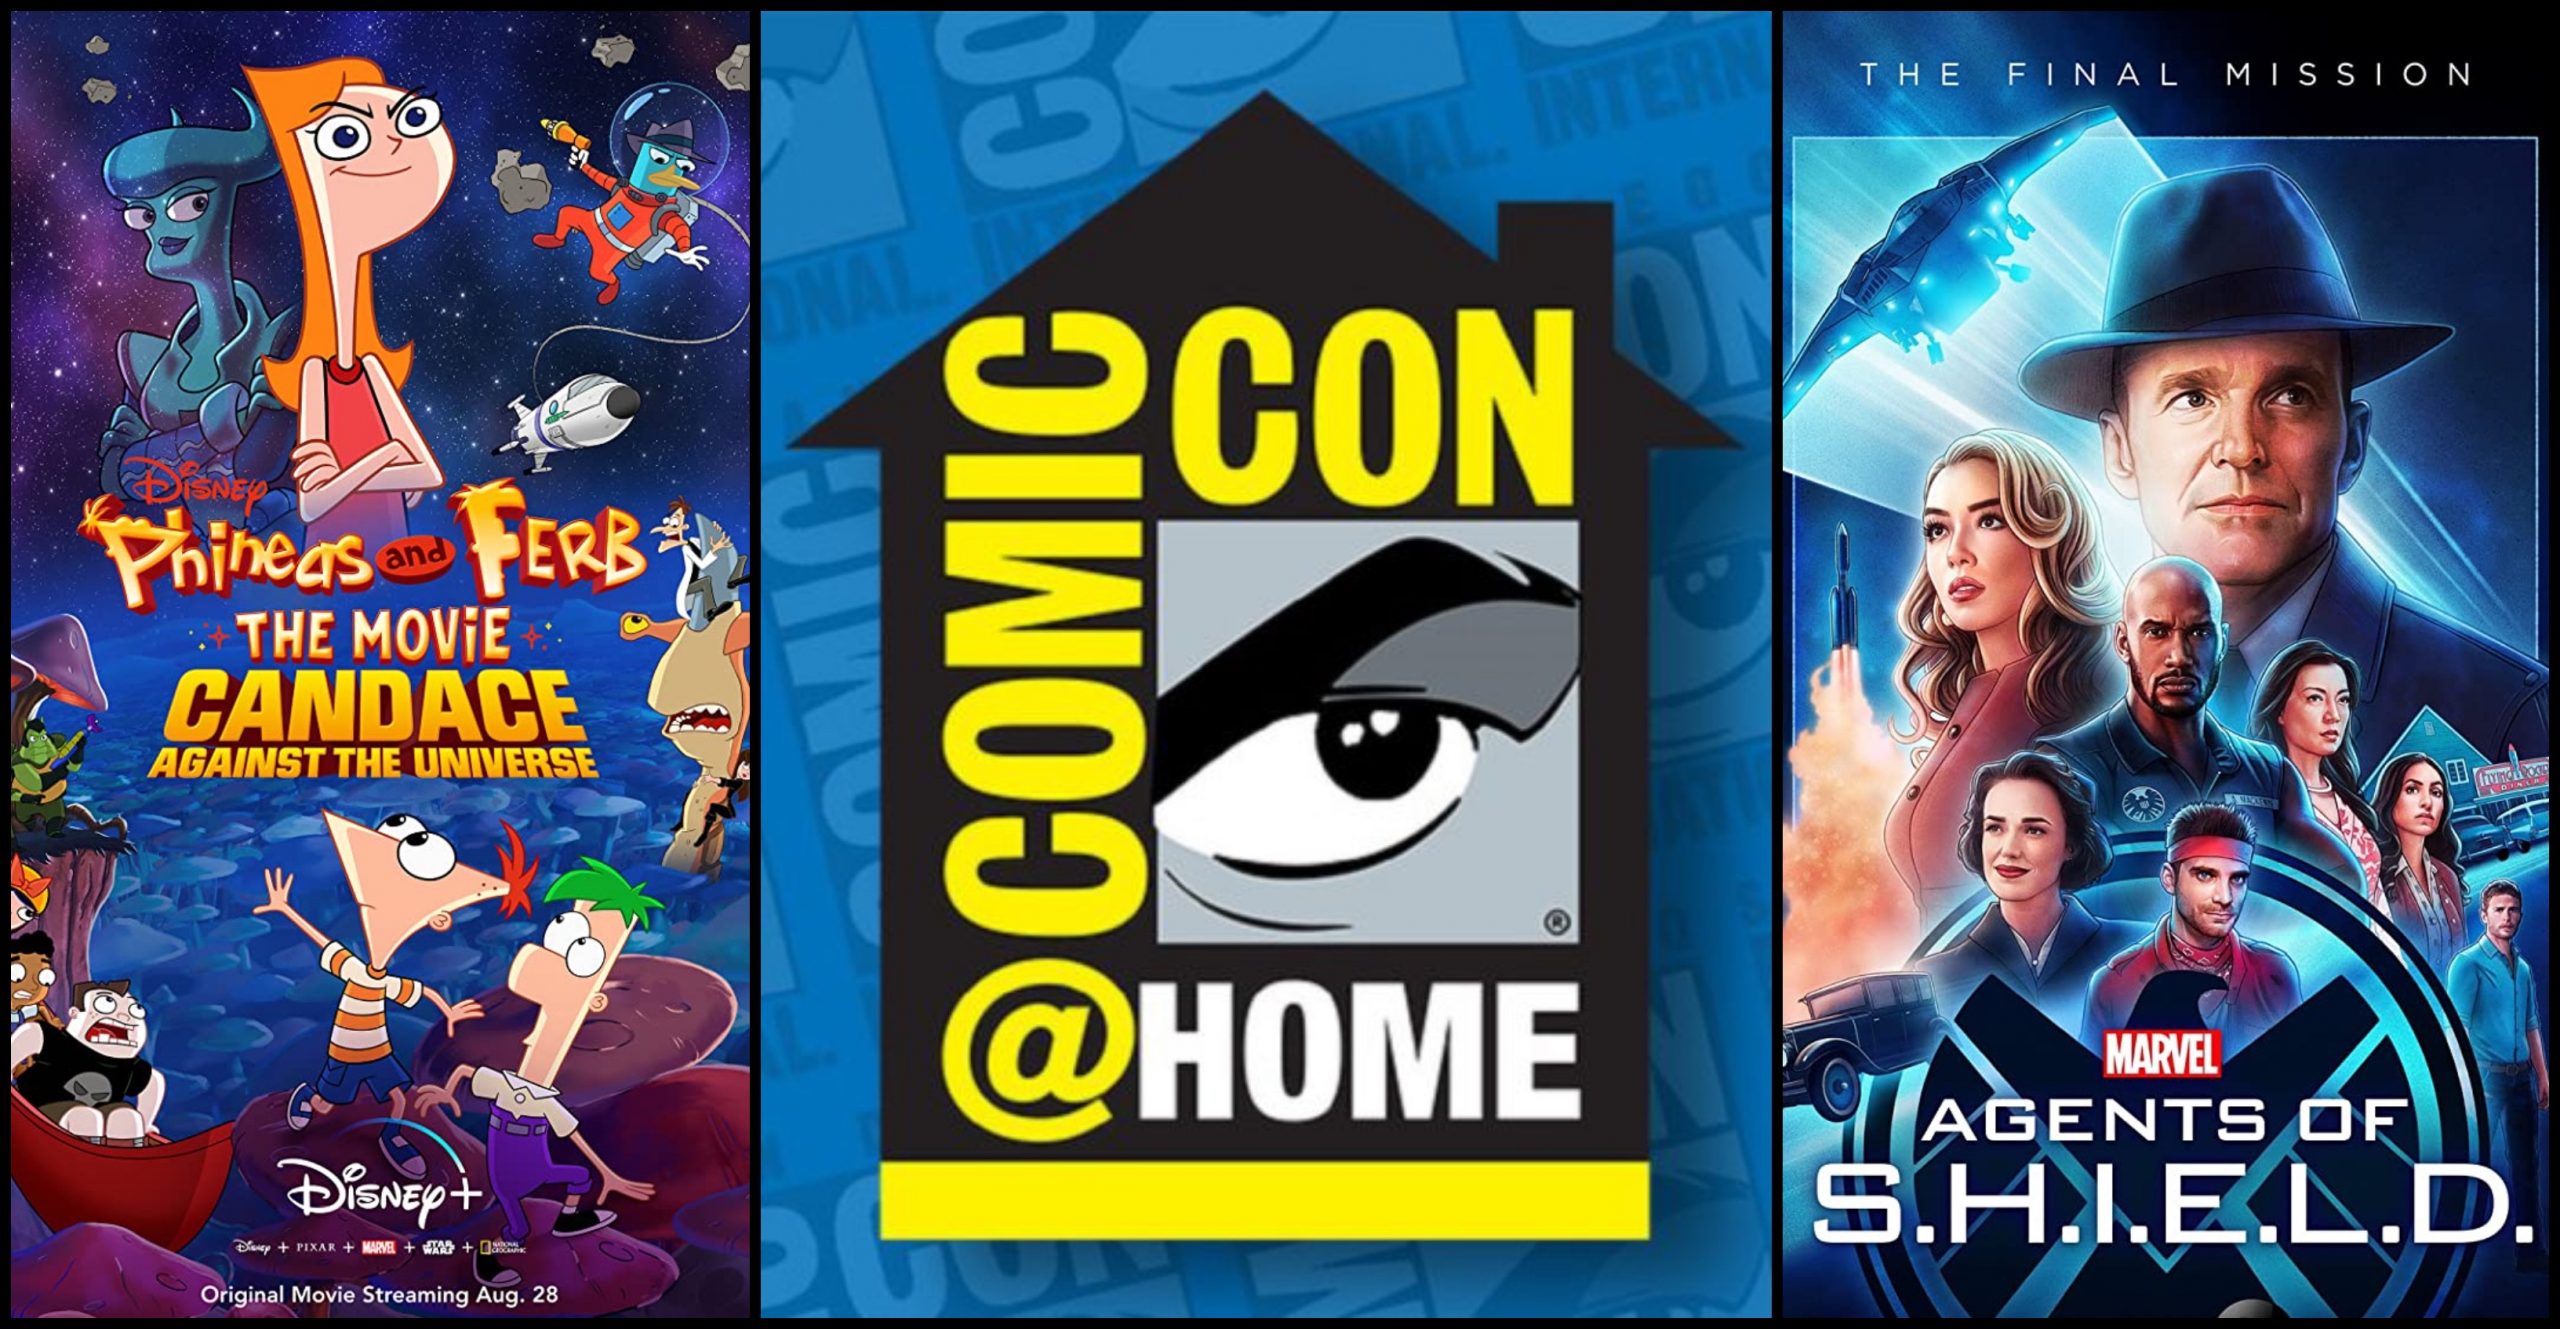 New Updates and Exciting Announcements from Disney’s Comic Con @ Home Panels